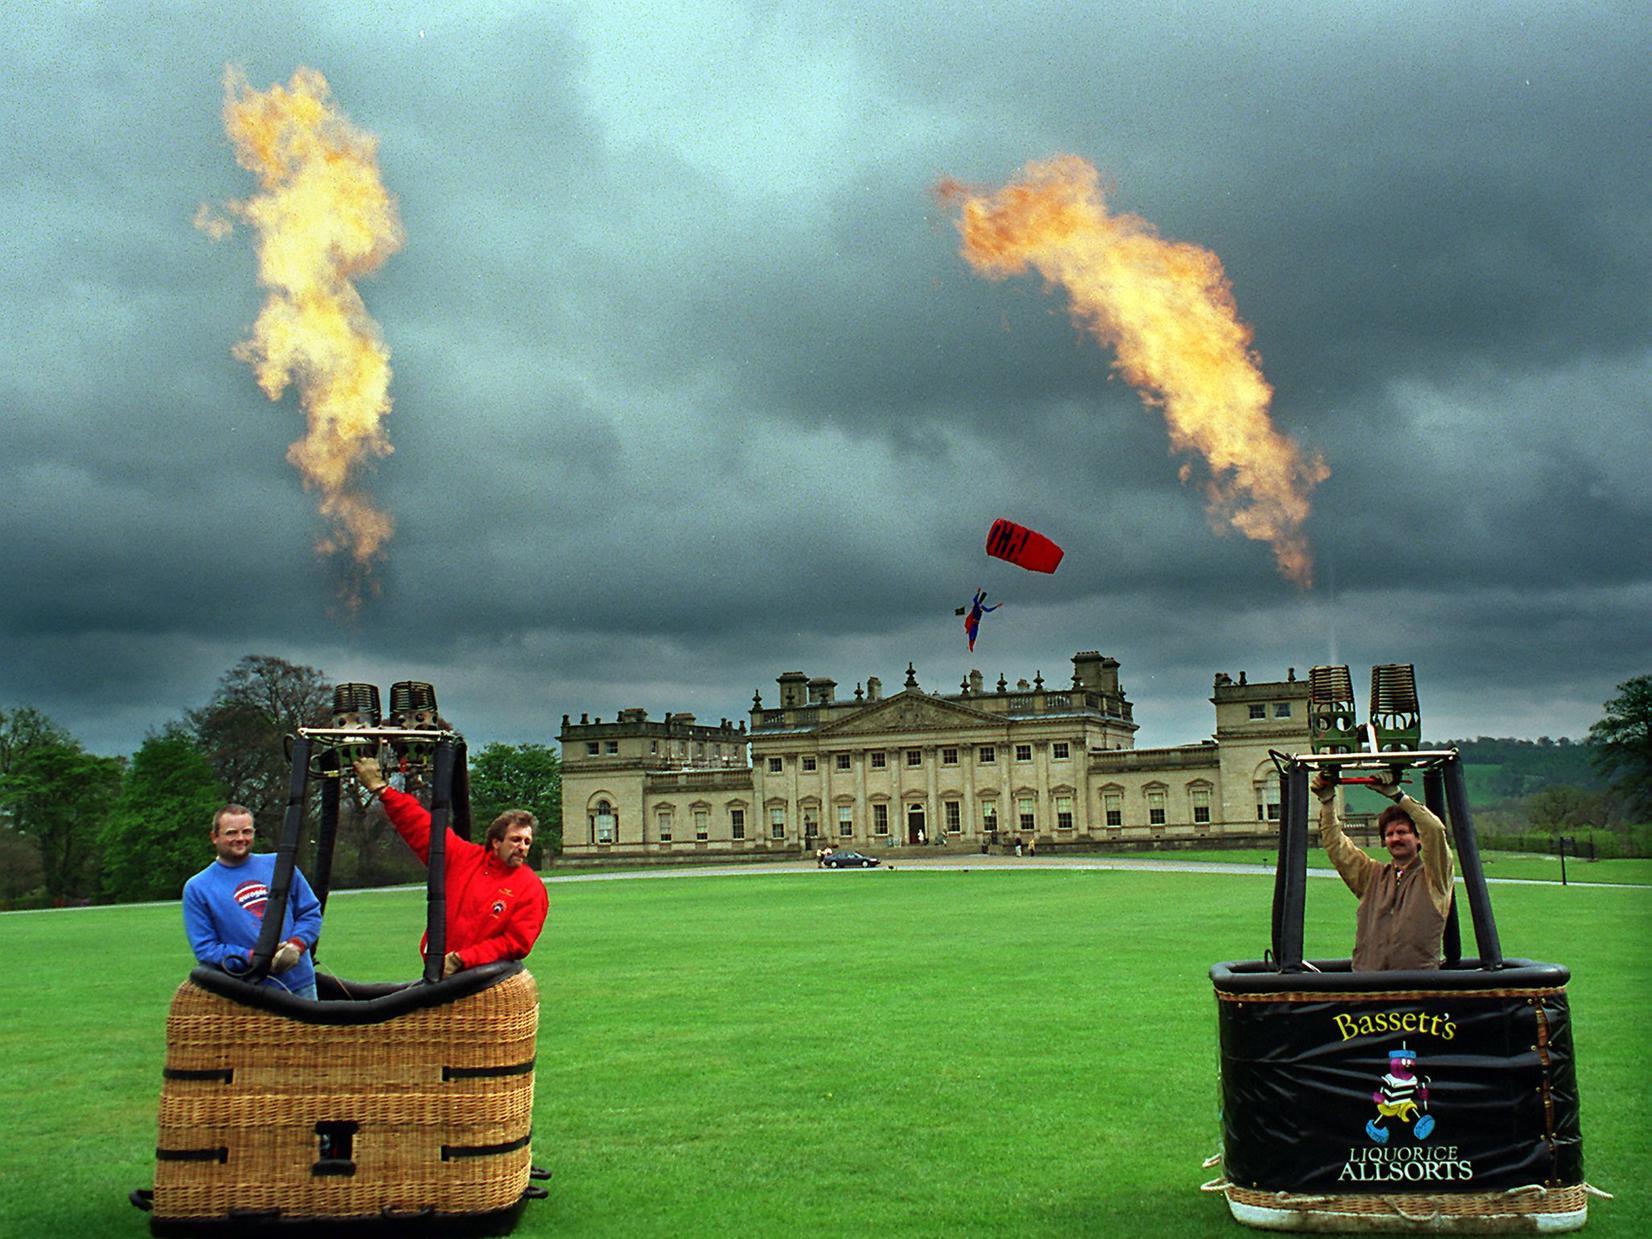 They were testing the burners ahead of a Balloons and Kites Festival at Harewood House in April 1997.